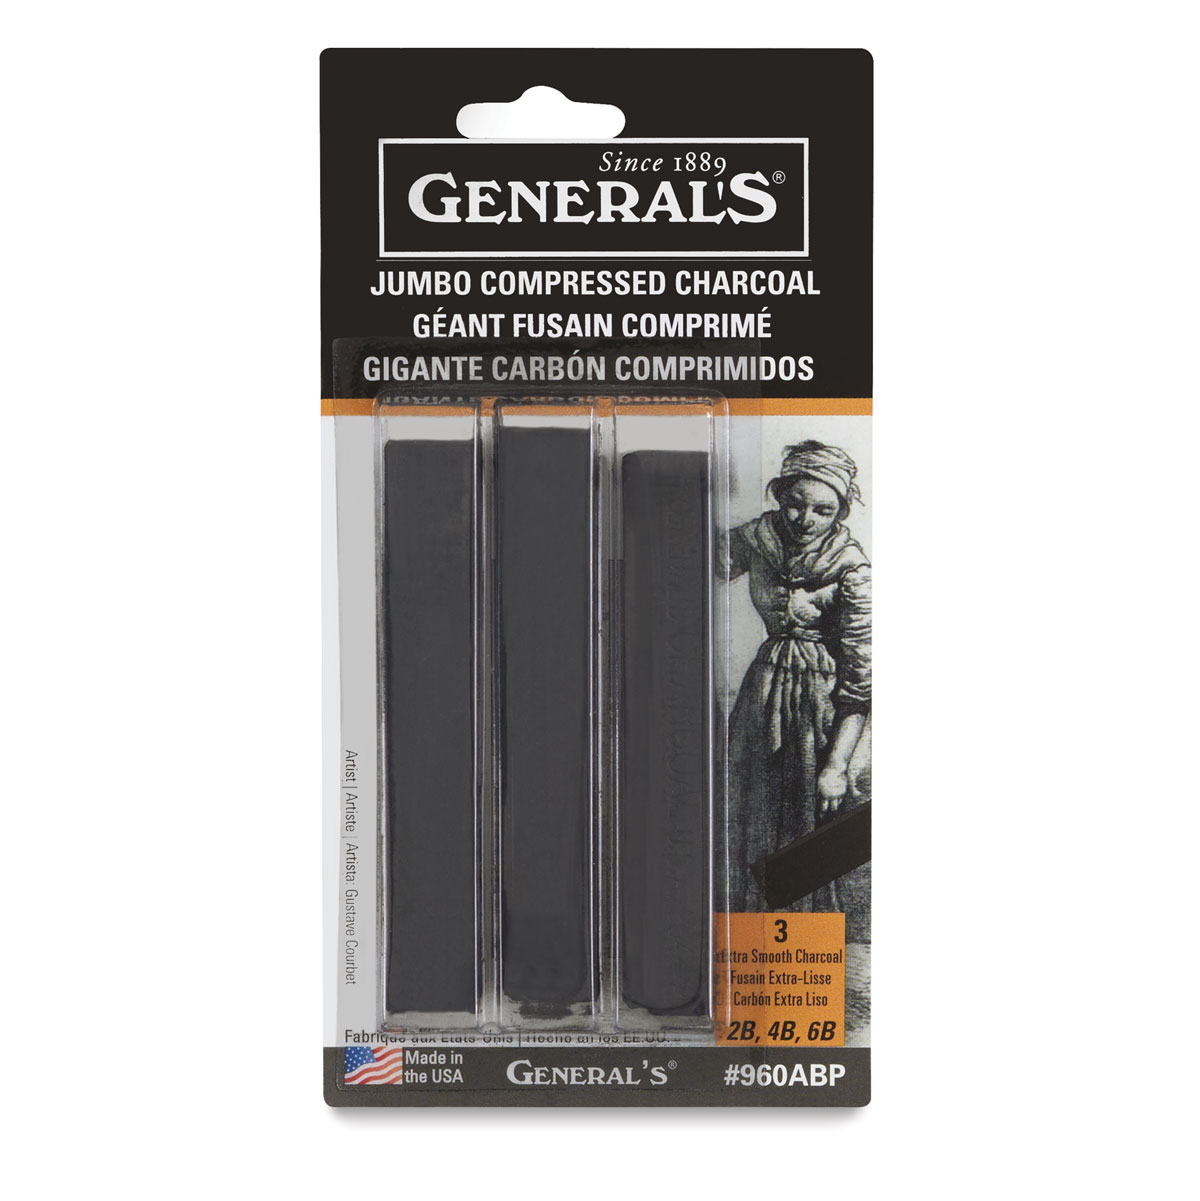 General's Compressed Charcoal Class Pack